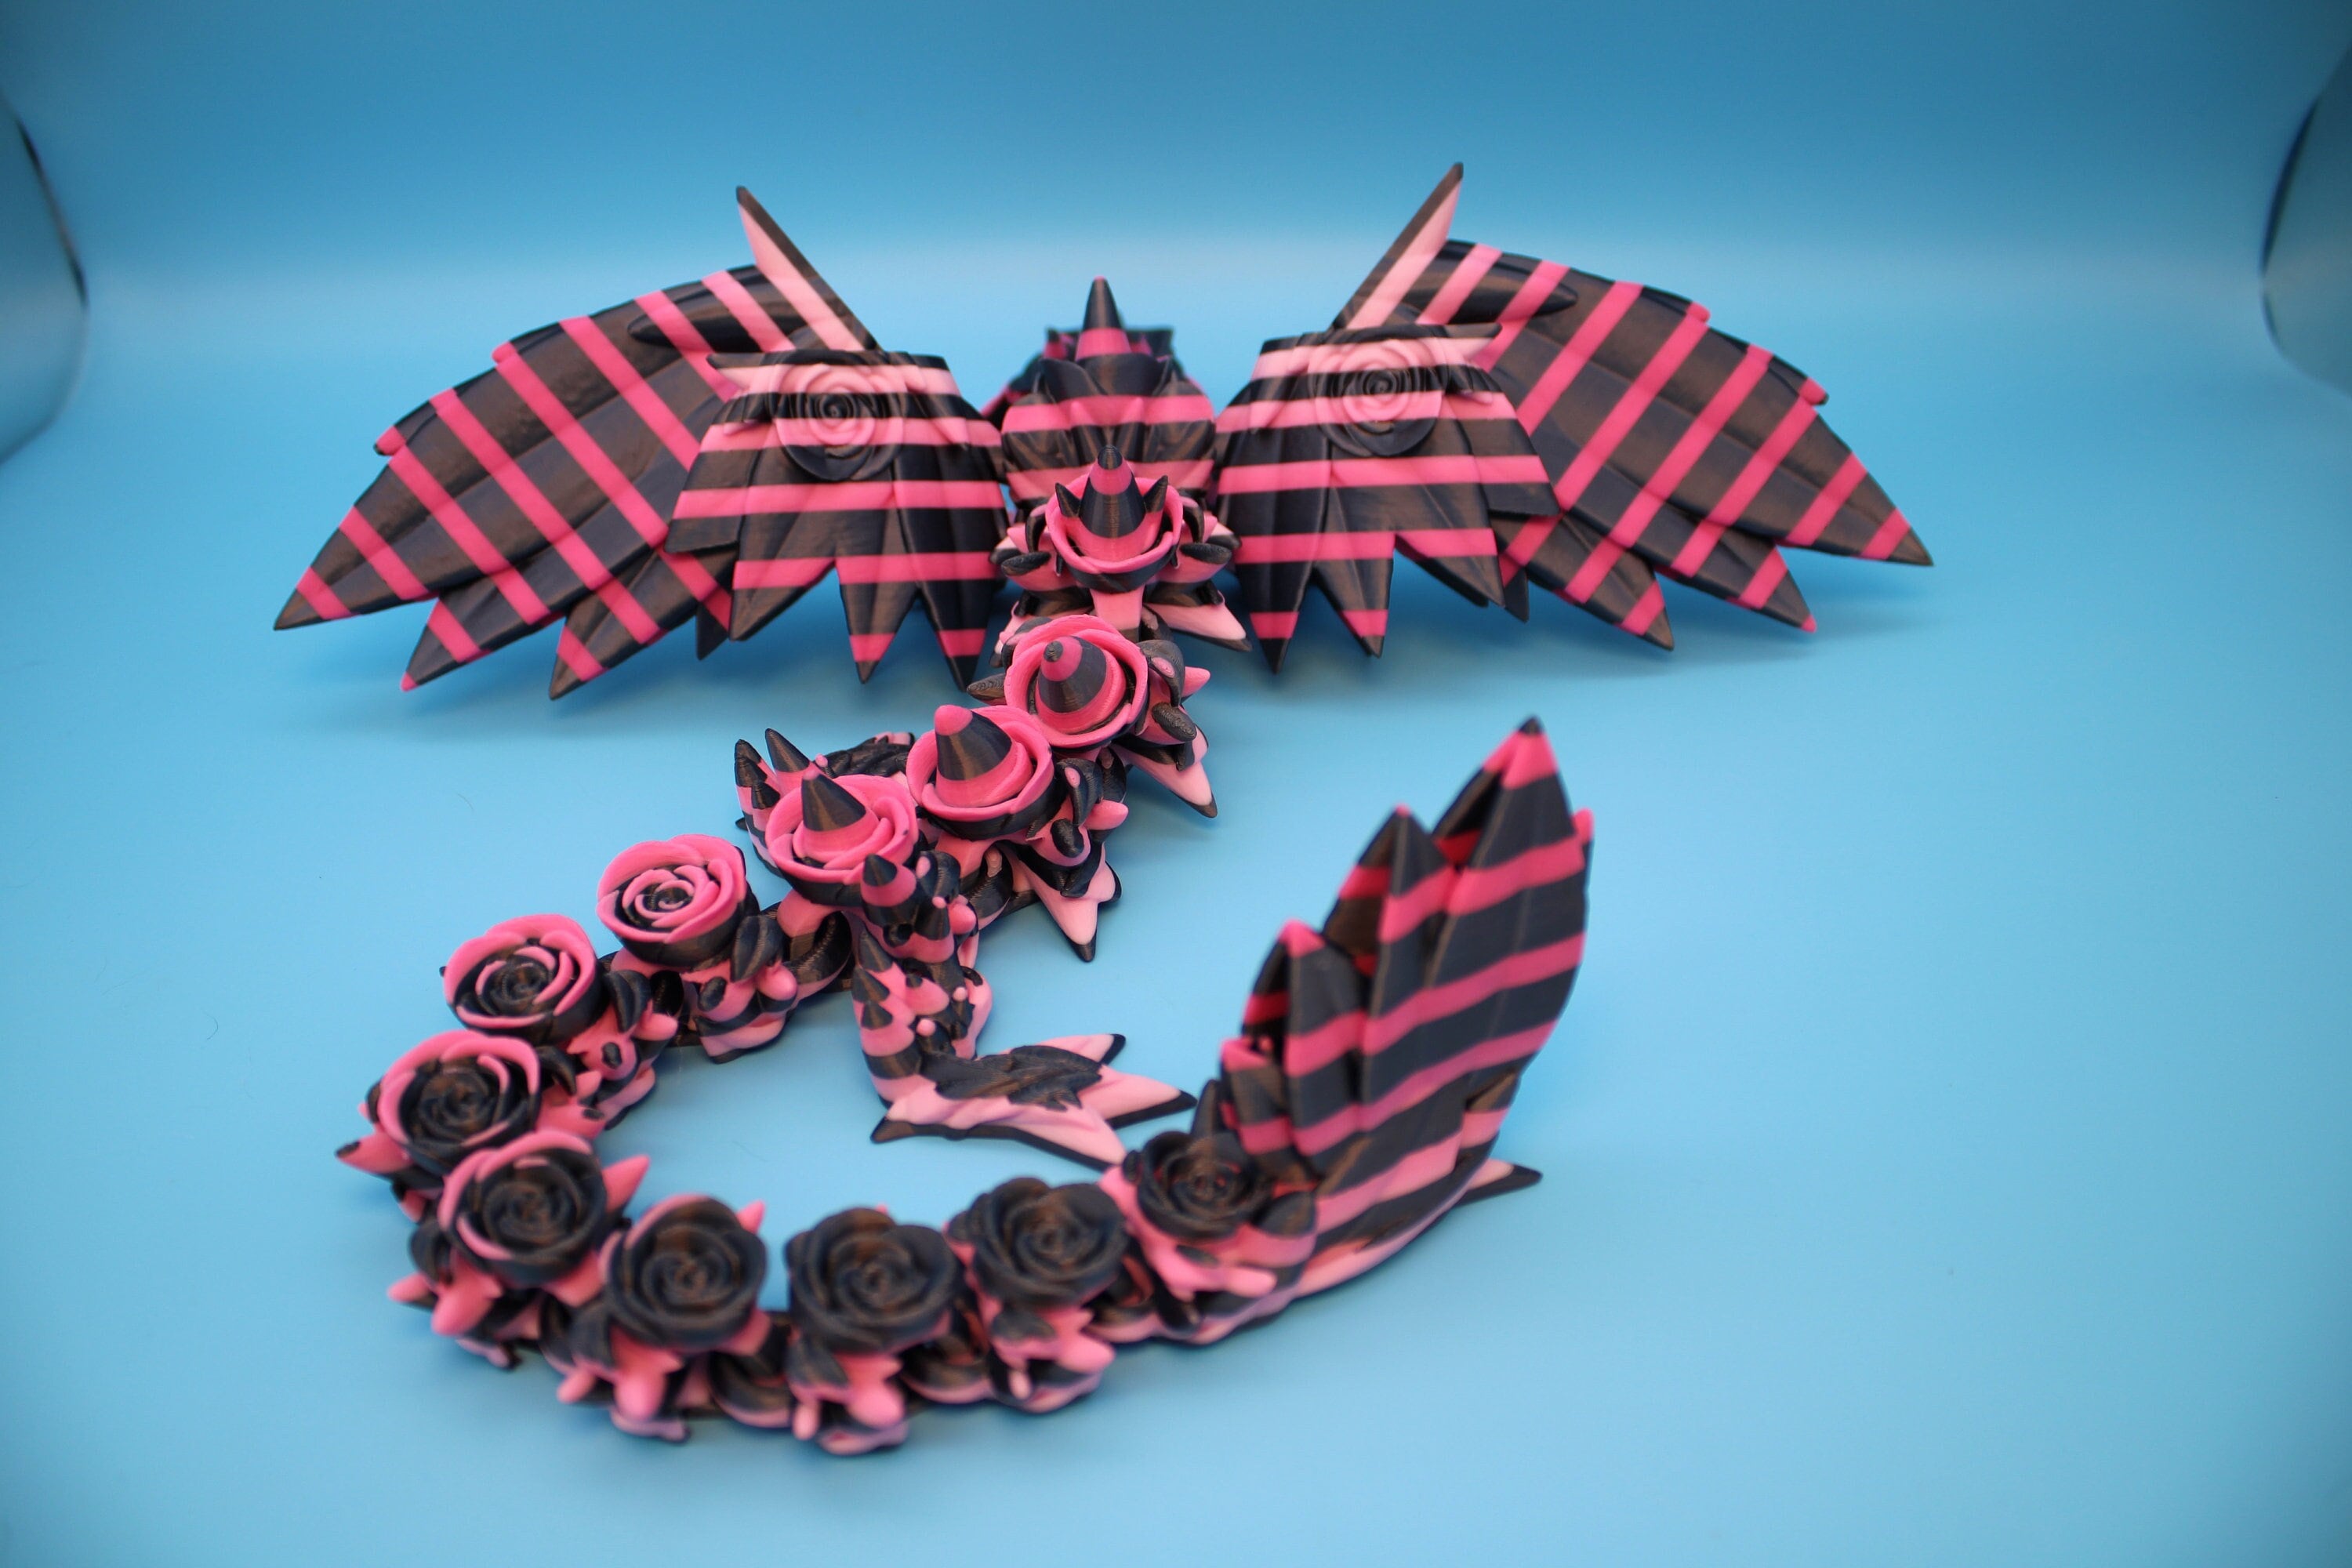 Beautiful Rose Wing Articulating Dragon | 3D Printed Fidget | Flexi Toy | Adult Fidget Toy | Sensory Desk Toy | 19 in. | Valentines Day